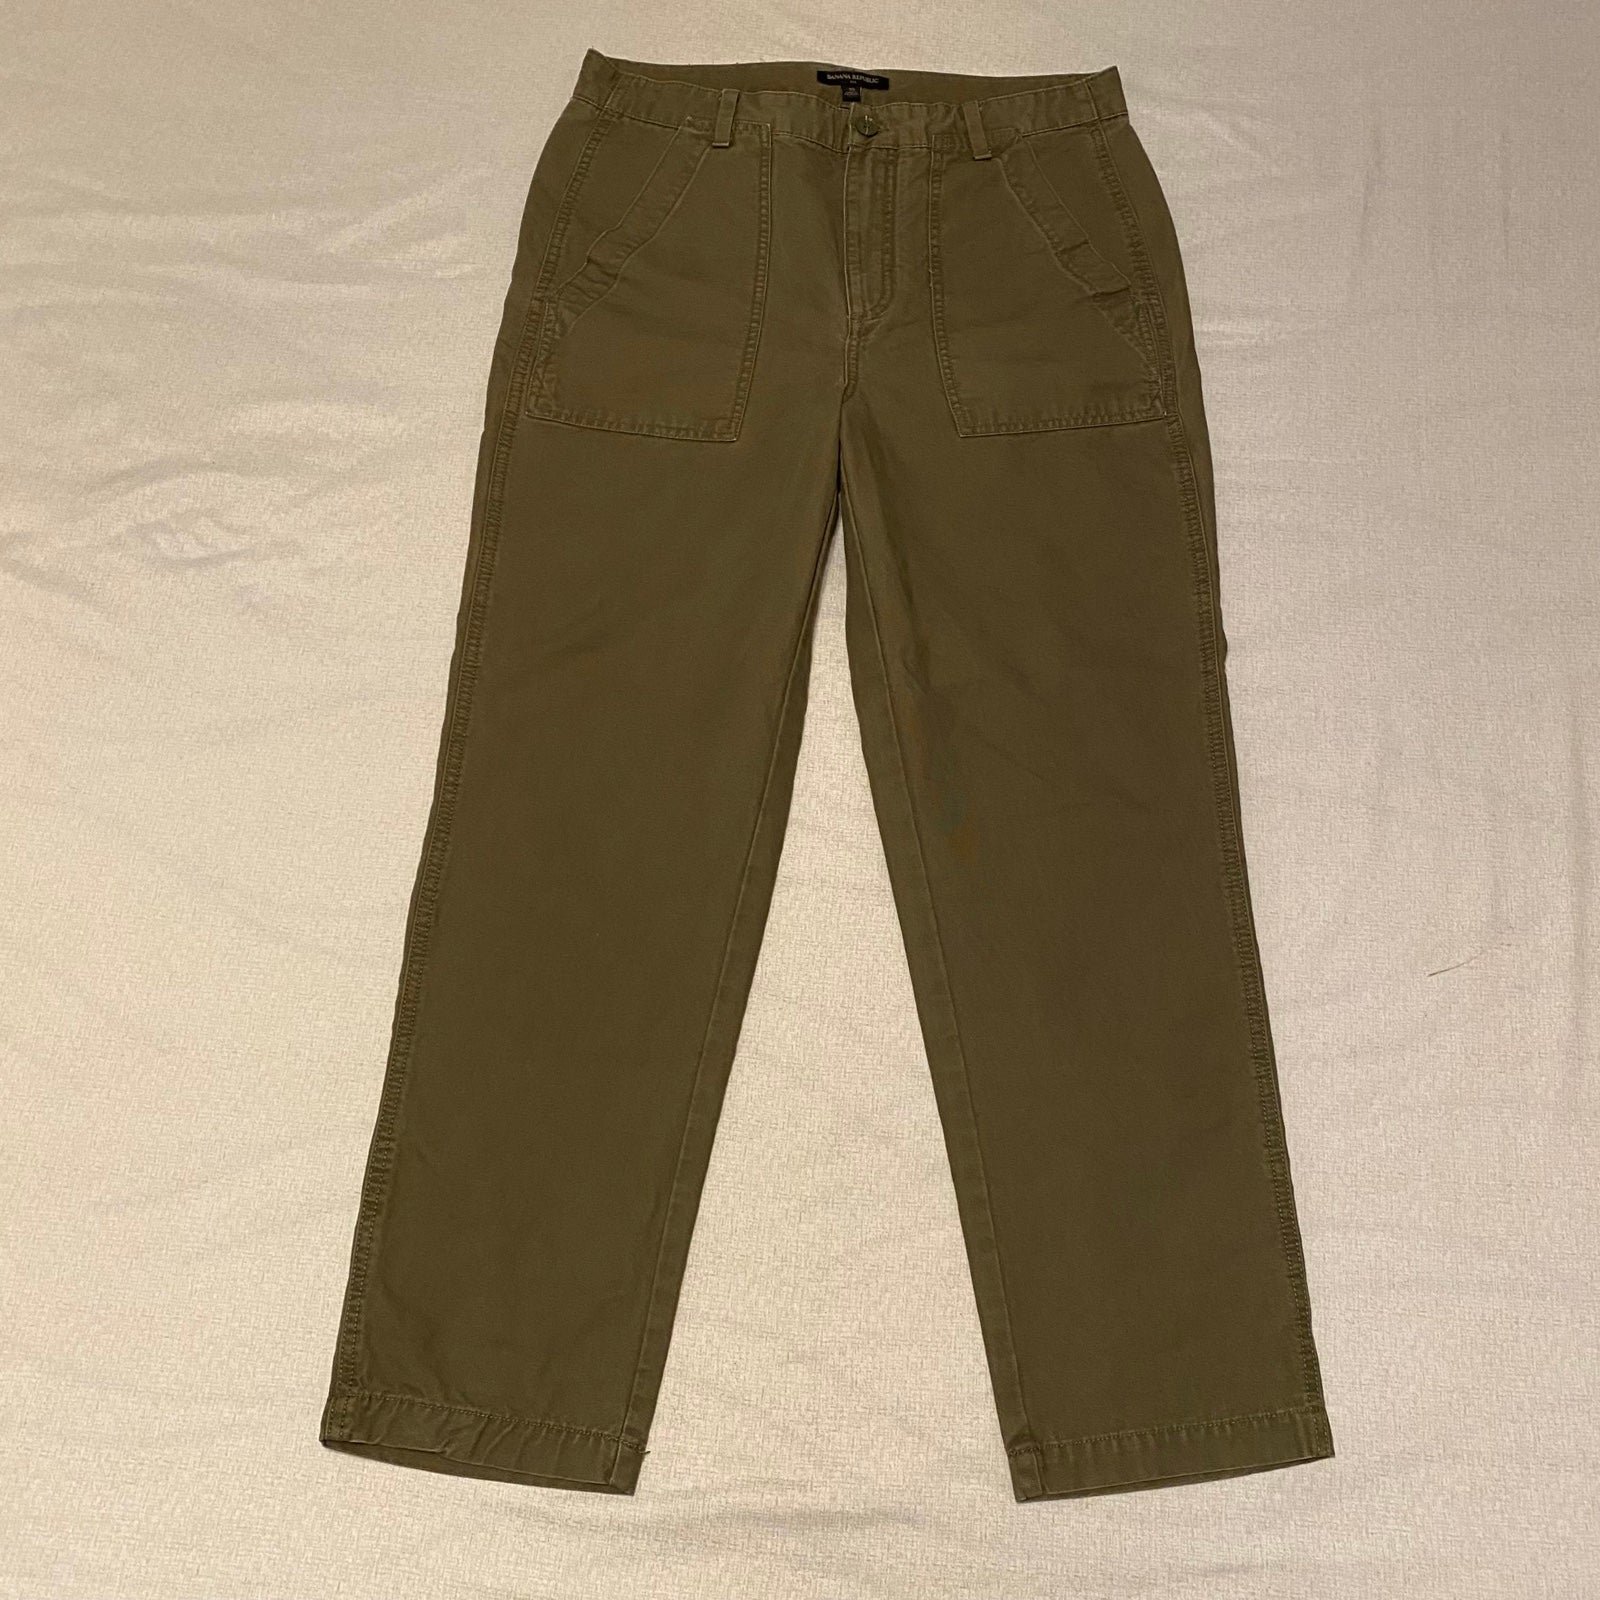 High quality Banana Republic high waisted trousers size